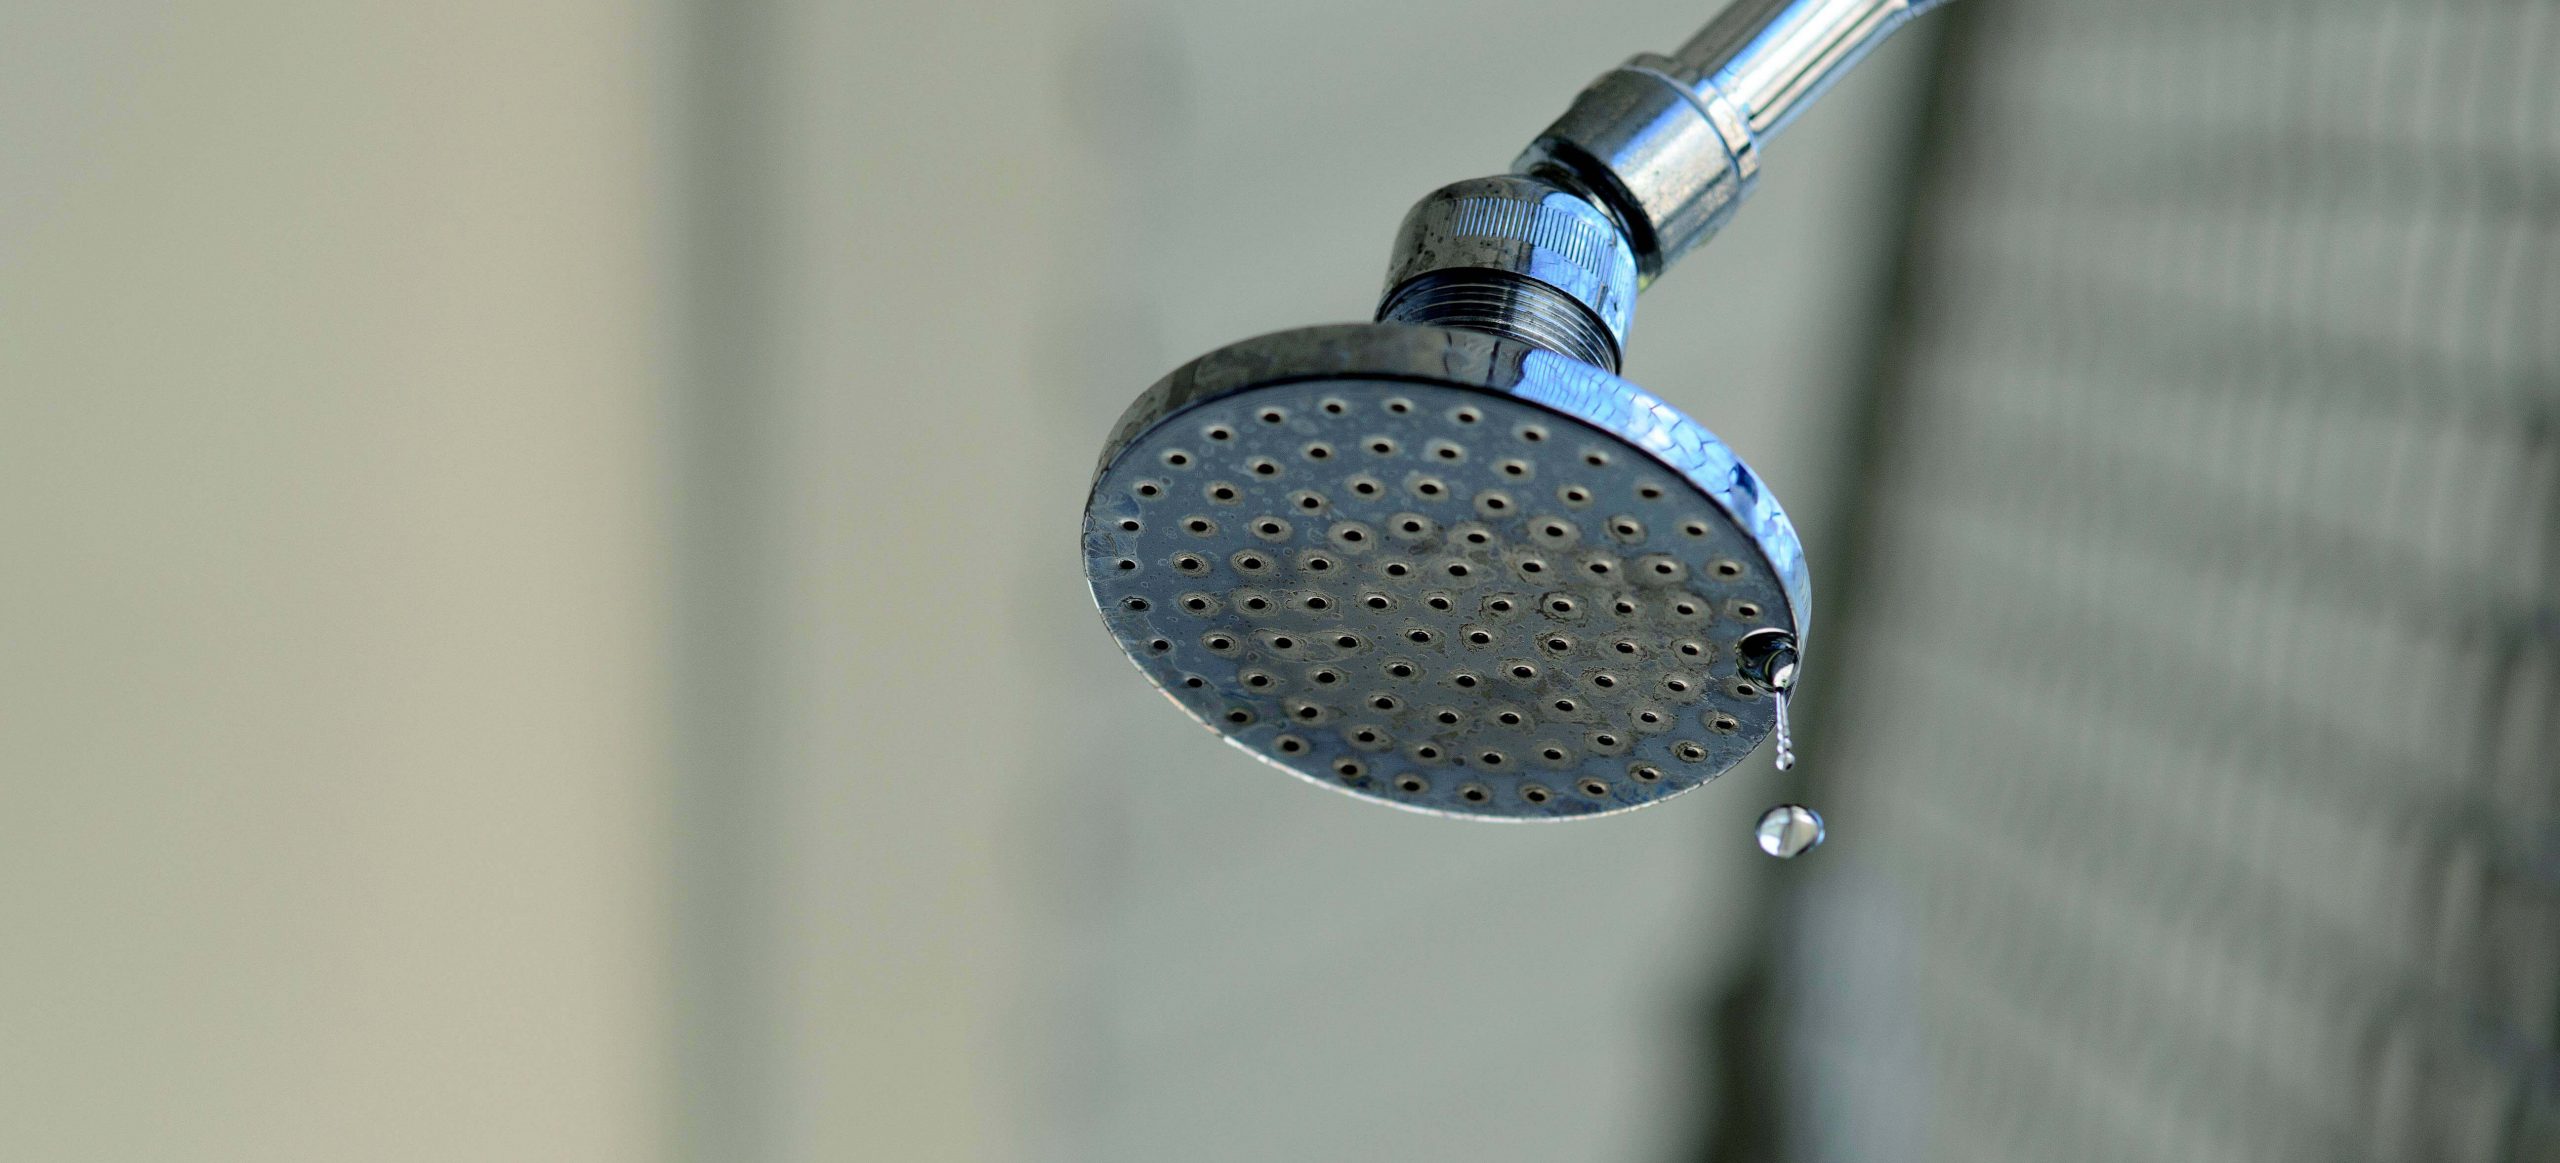 Leaking Shower - 8 Causes and Solutions | My Plumber